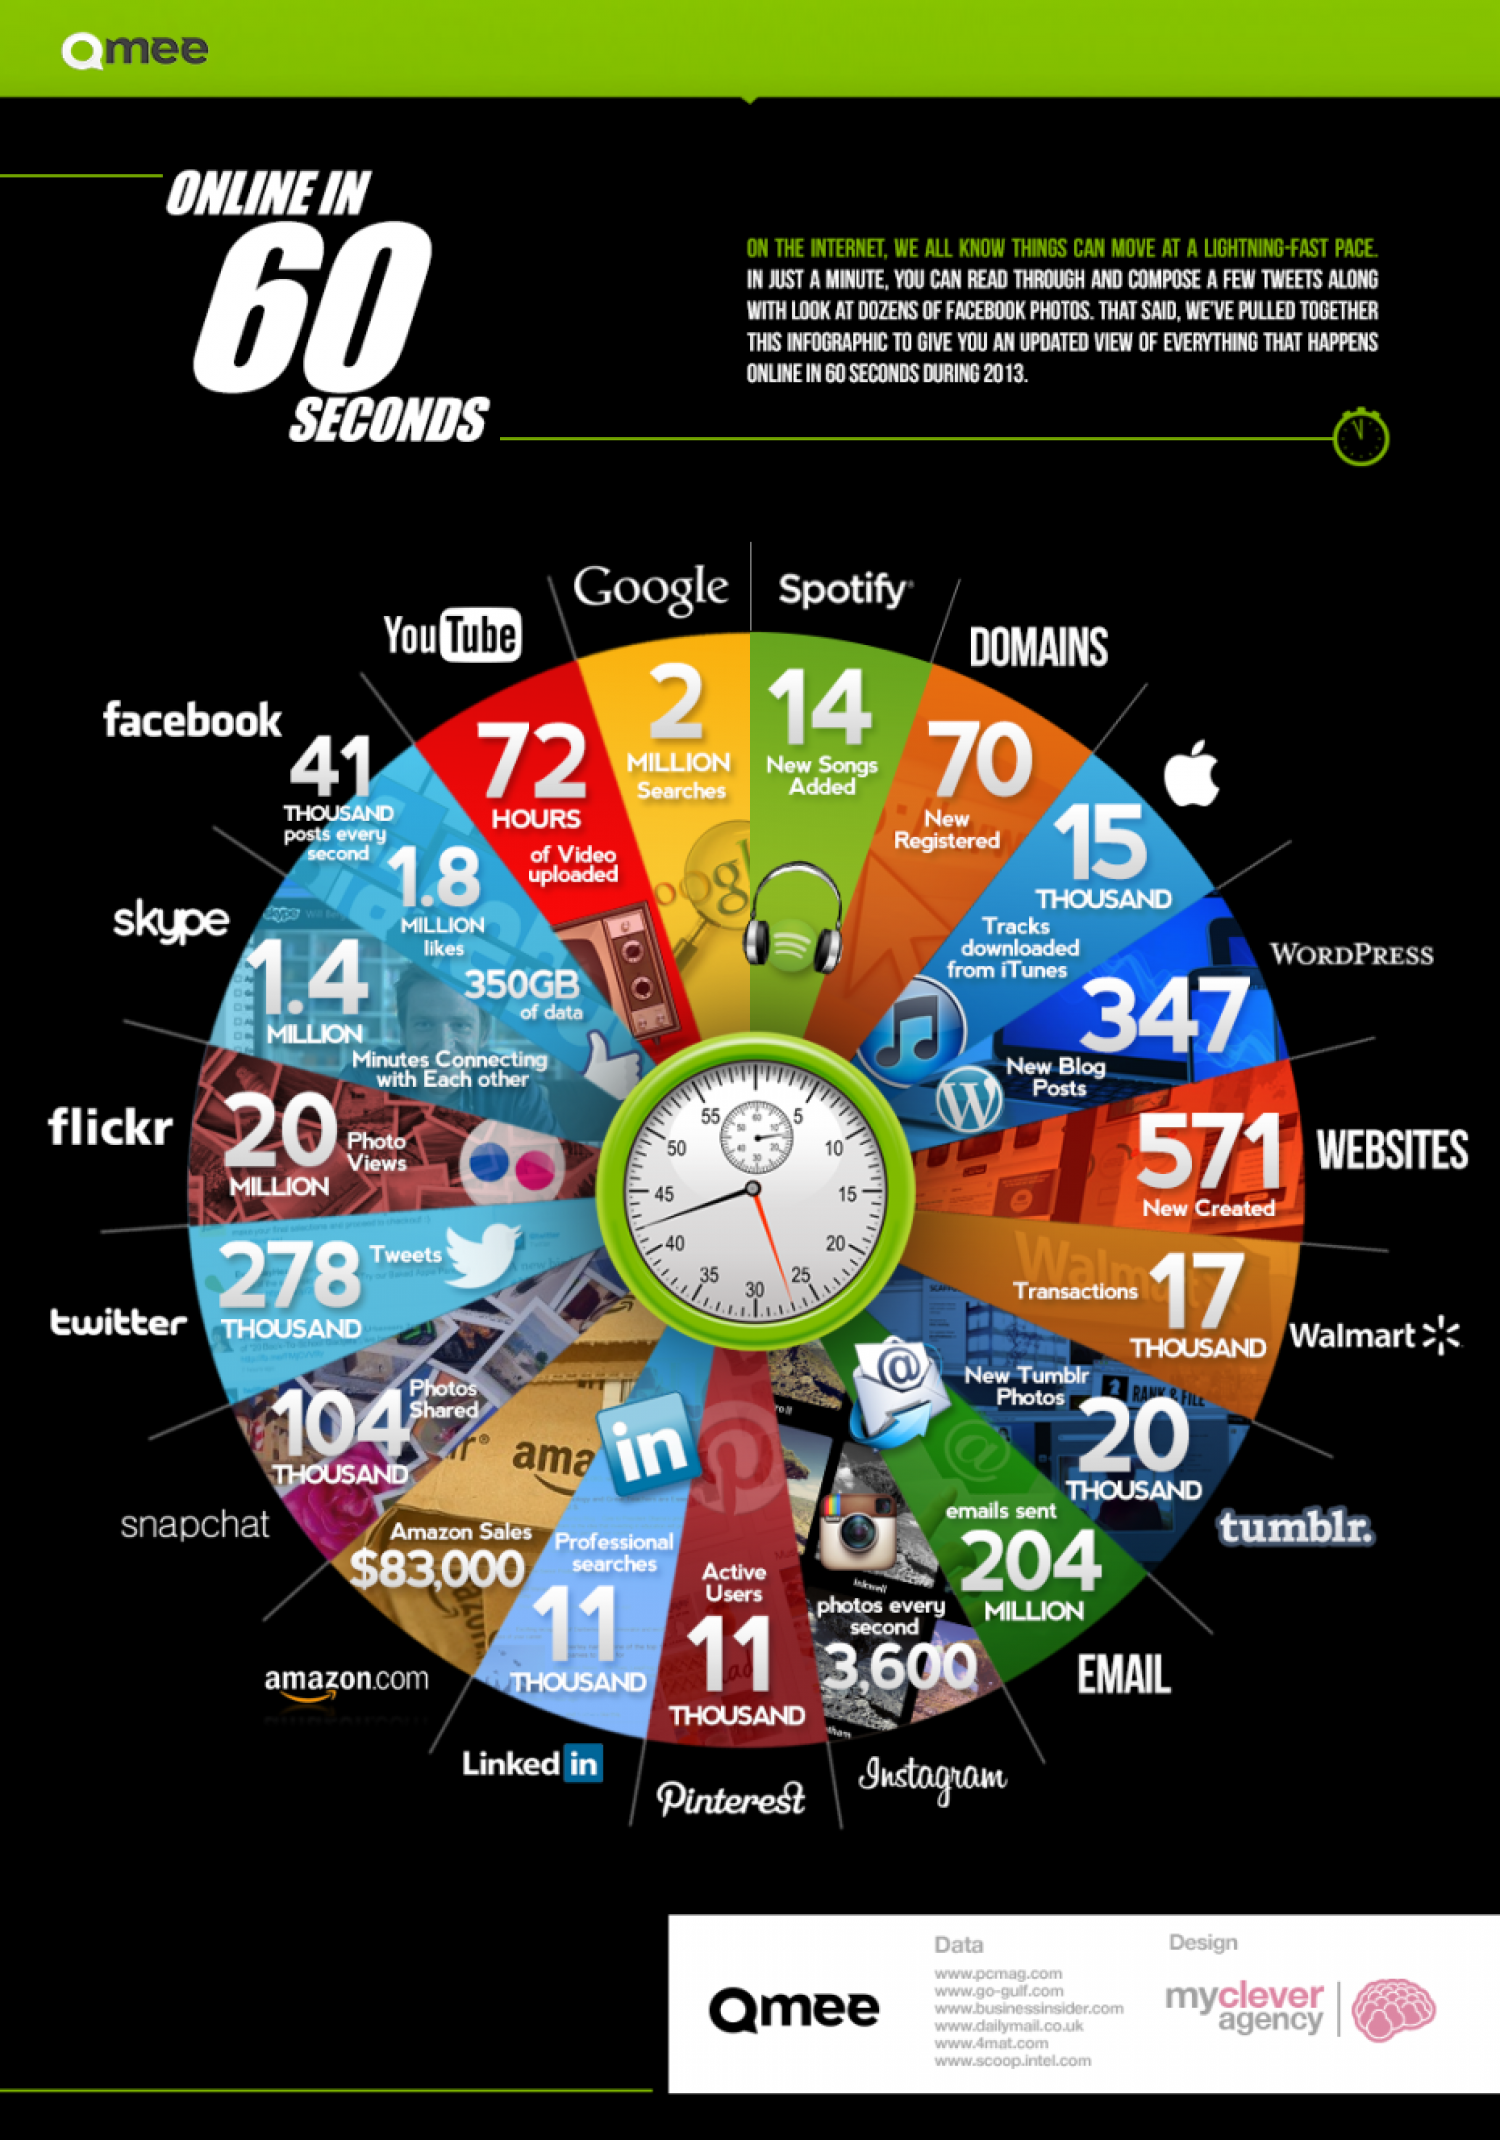 Online in 60 Seconds Infographic